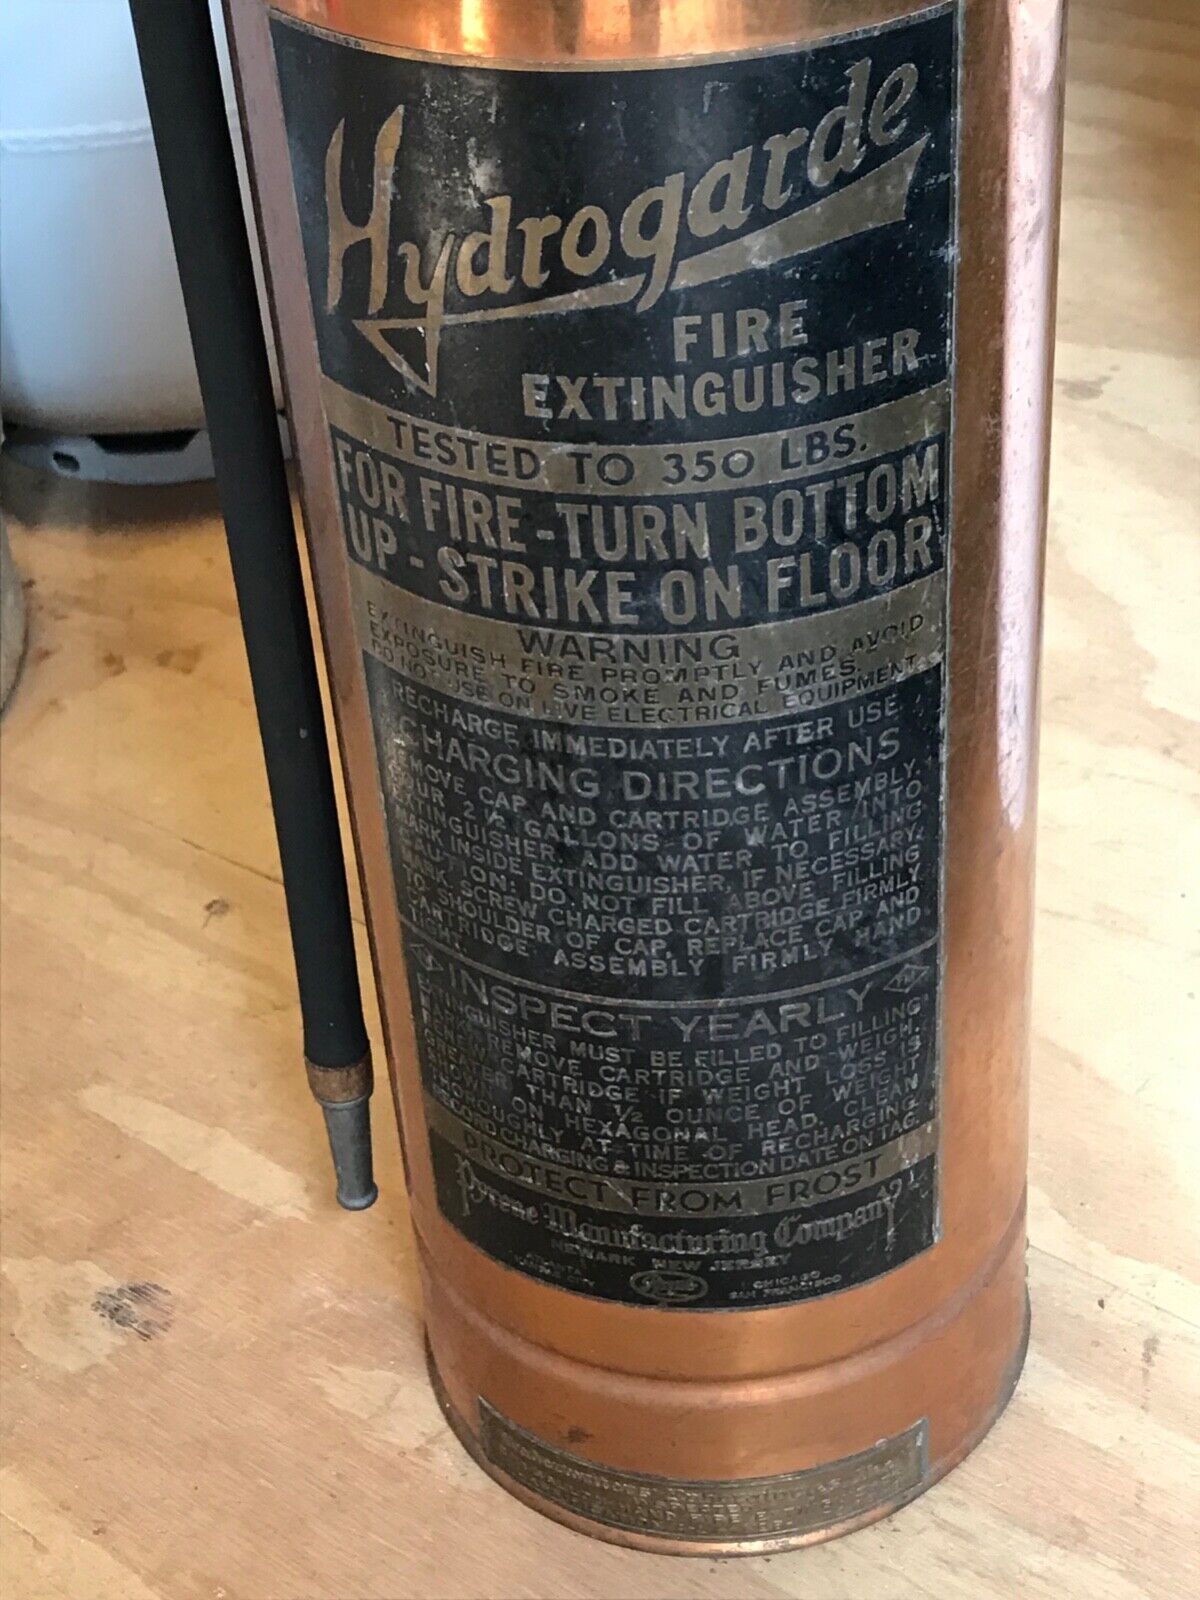 VERY RARE UNRESTORED.  Hydrogarde Fire extinguisher (NÉW JERSEY)offers Welcome